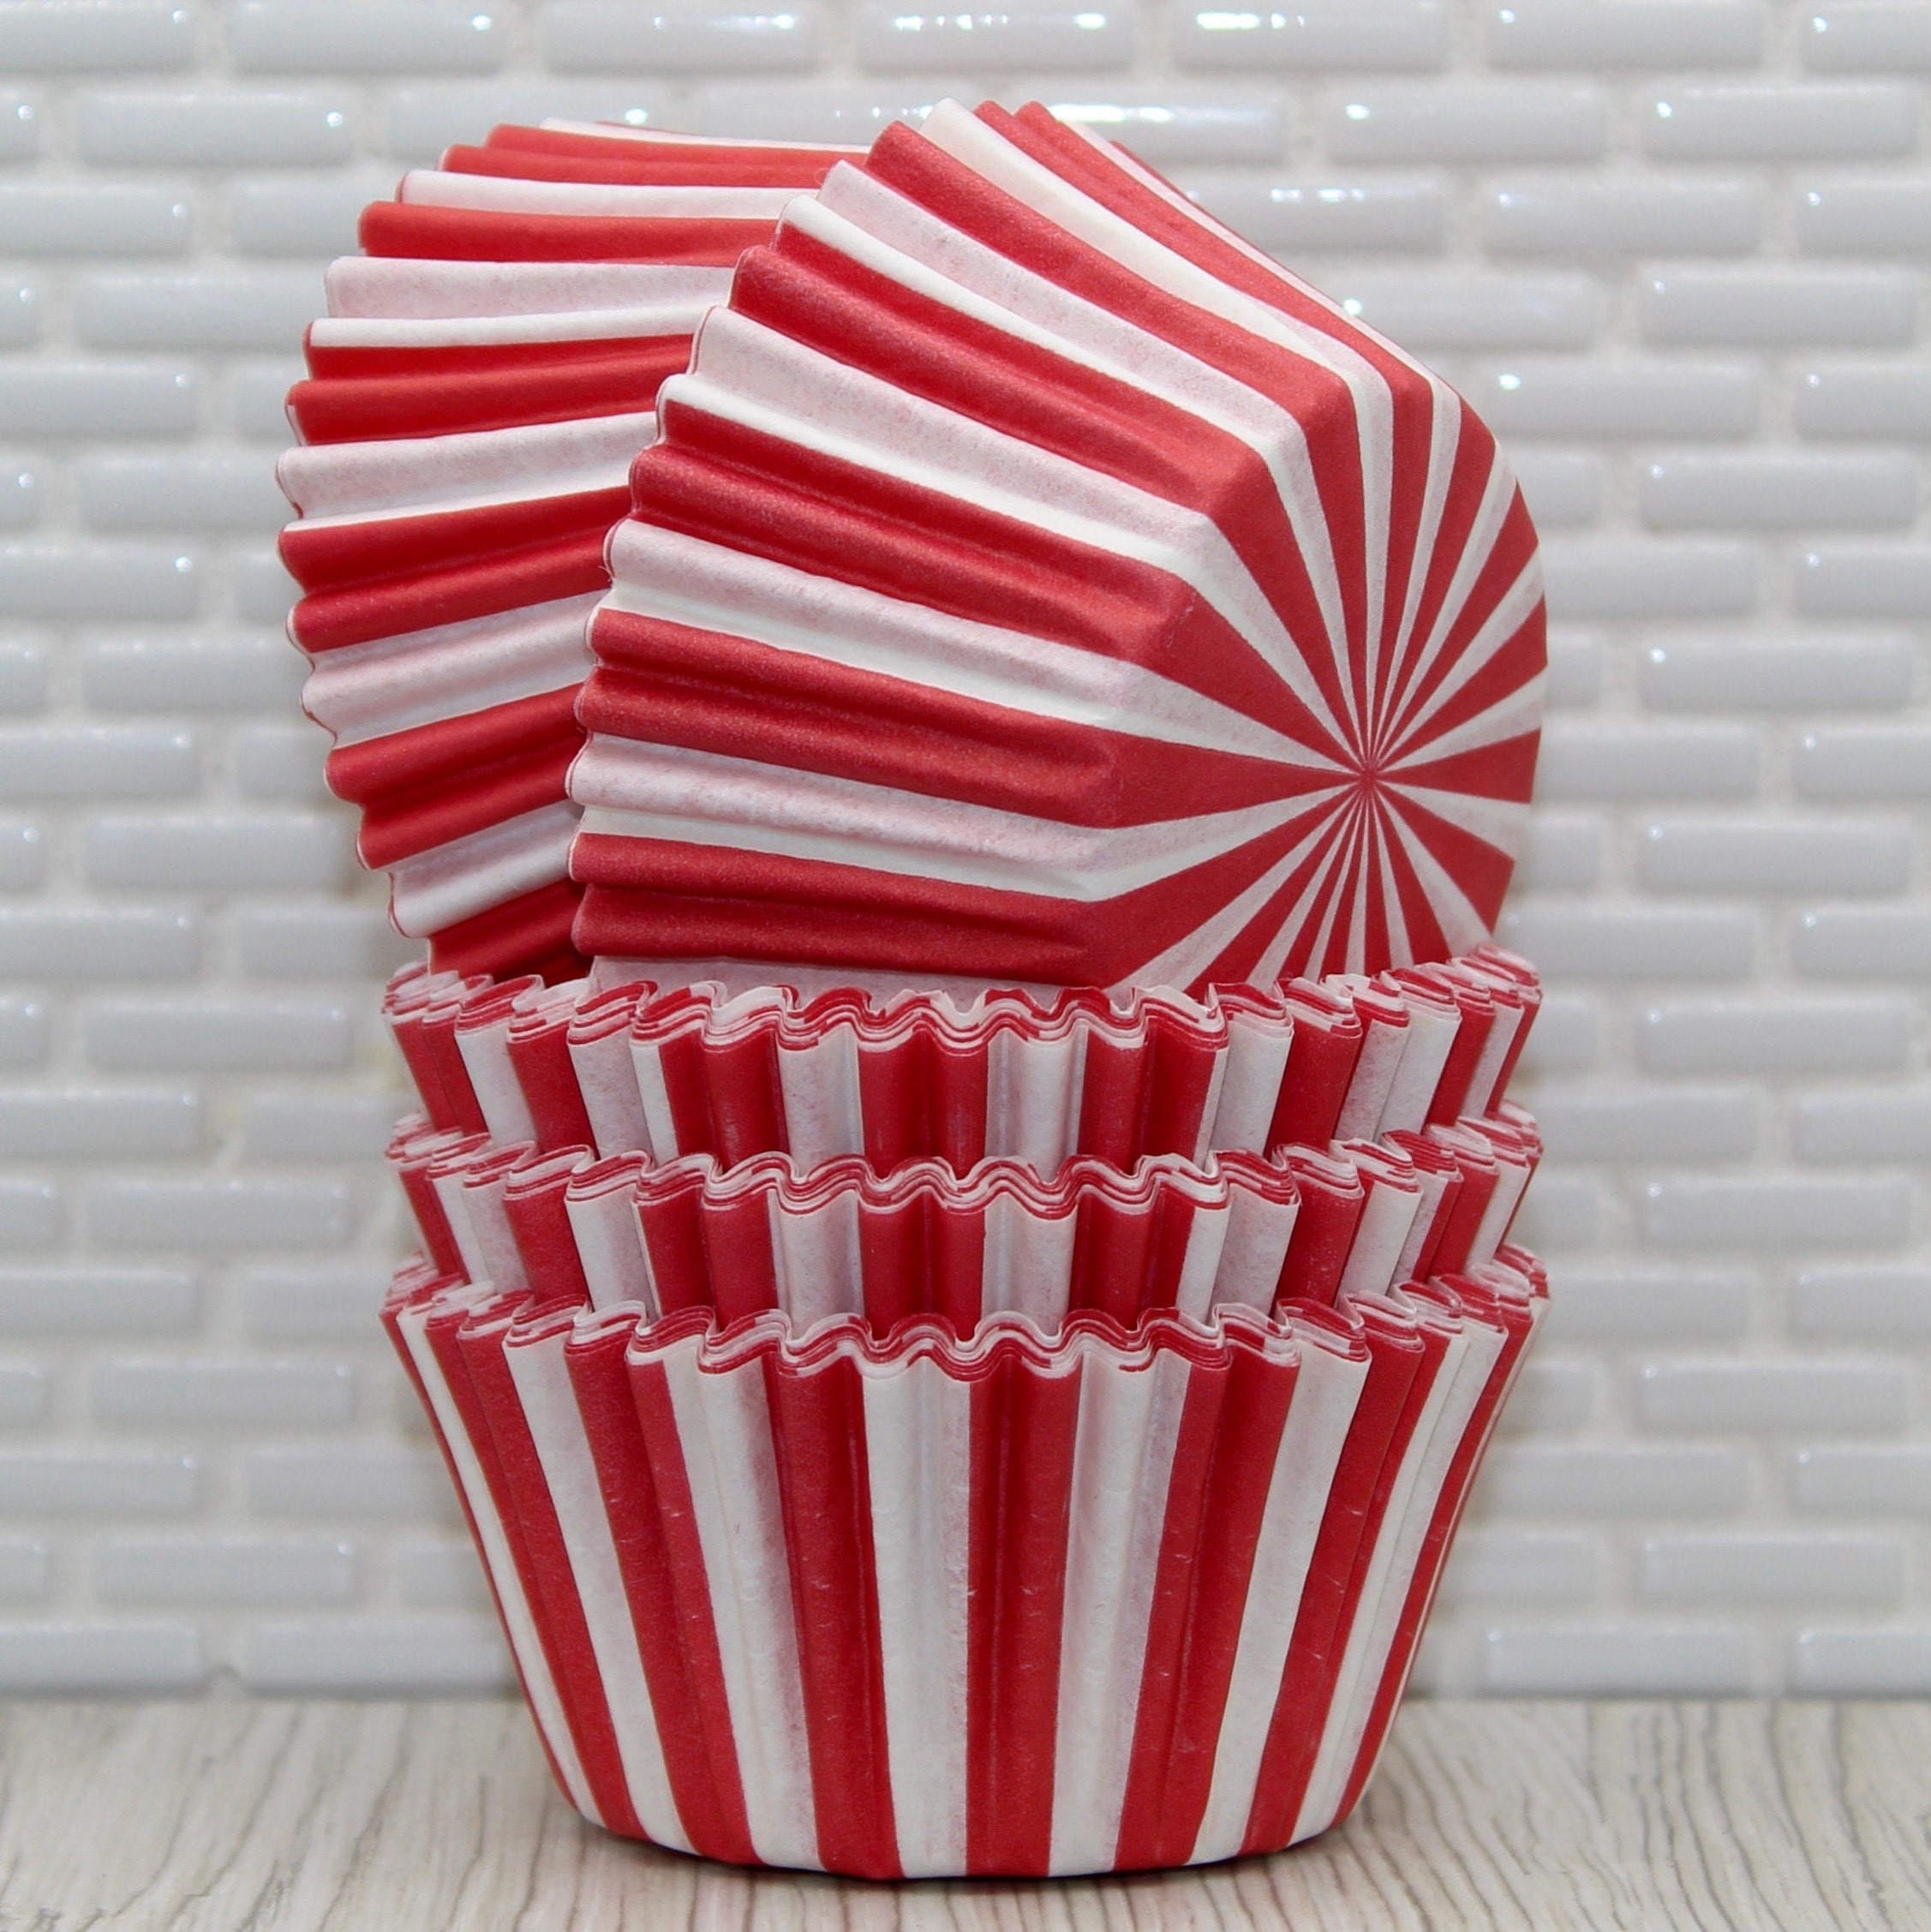 Standard Size Baking Cups Food-grade Greaseproof Paper Cupcake Liners, Size: 100pc Cupcake Liners, White